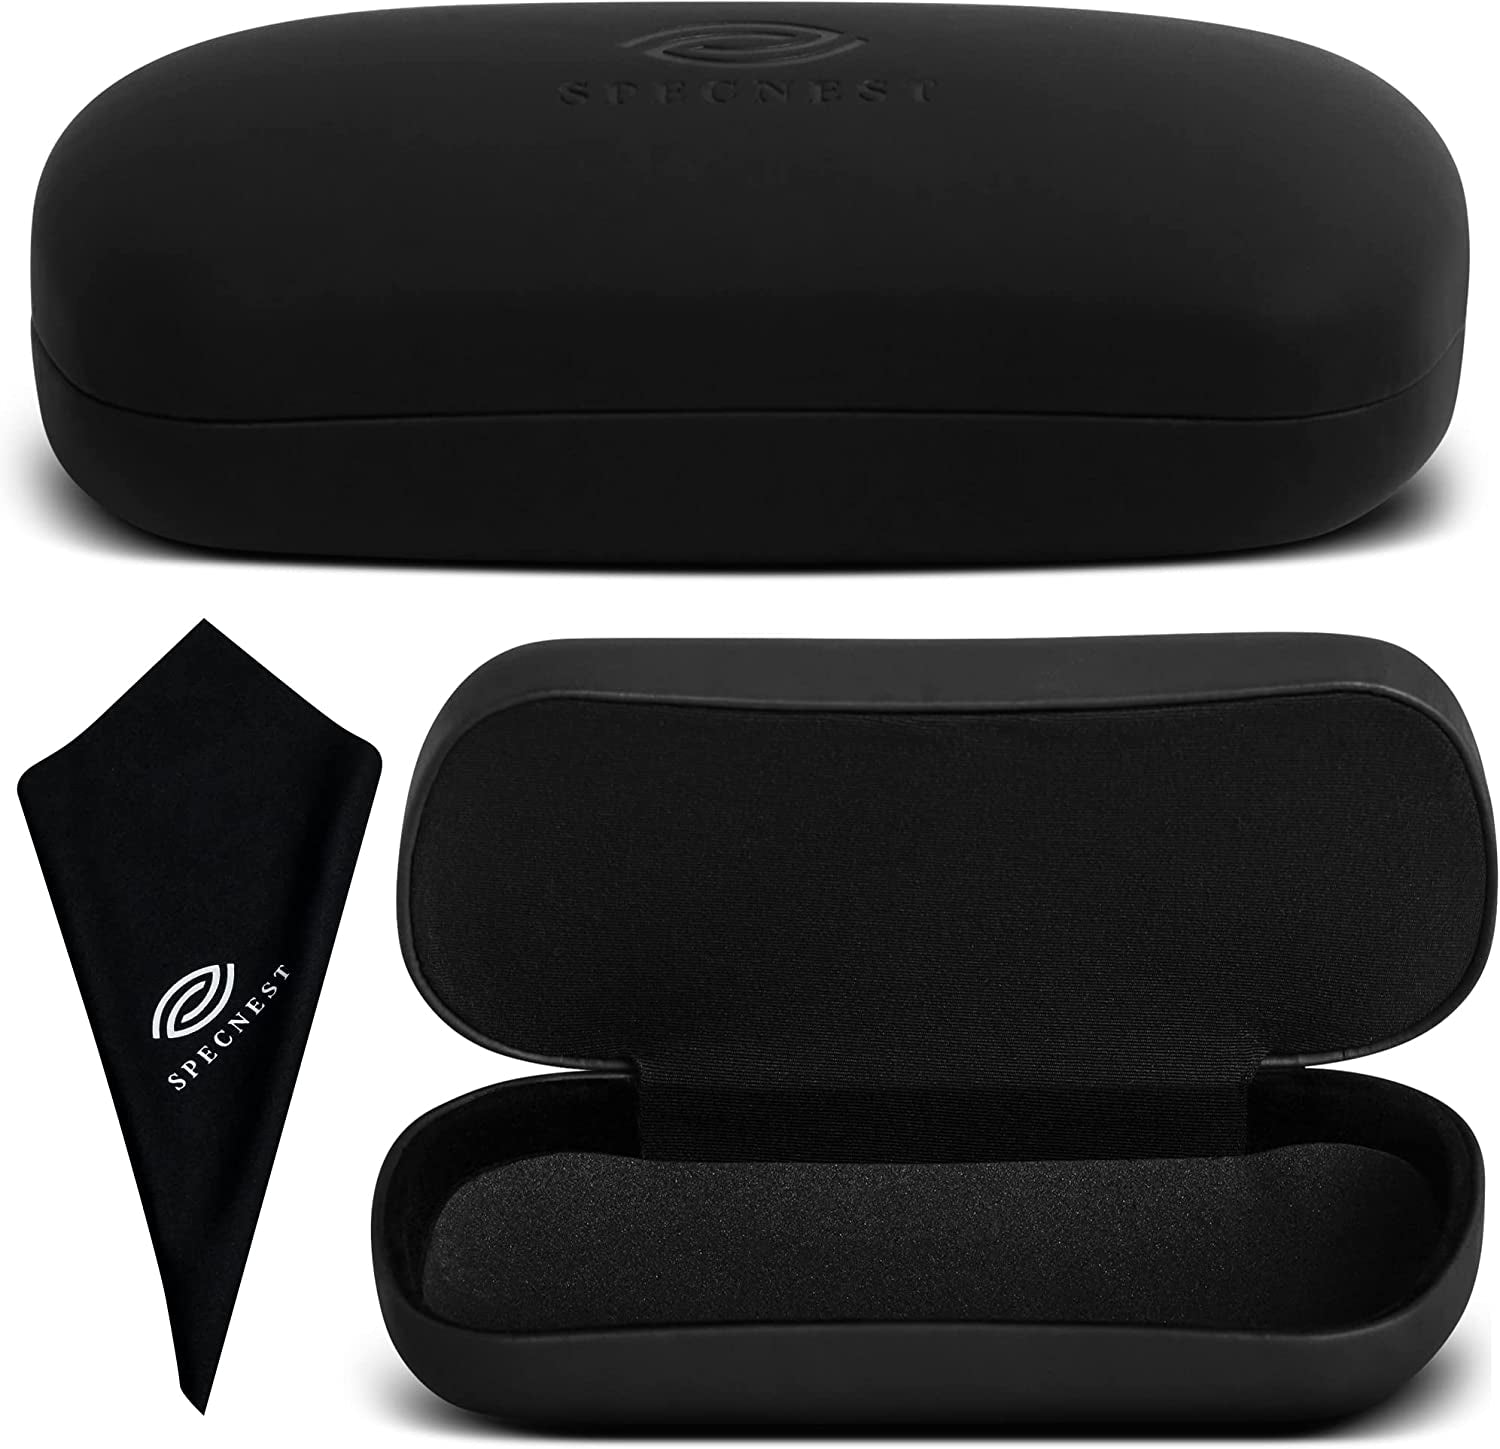 Specnest Sunglasses Case - Vegan Leather Sunglass Holder with Mesh Foam to Cradle Sunglasses Securely - Hard Eyeglass Case with Metal Construction - Designed by Optical Professionals